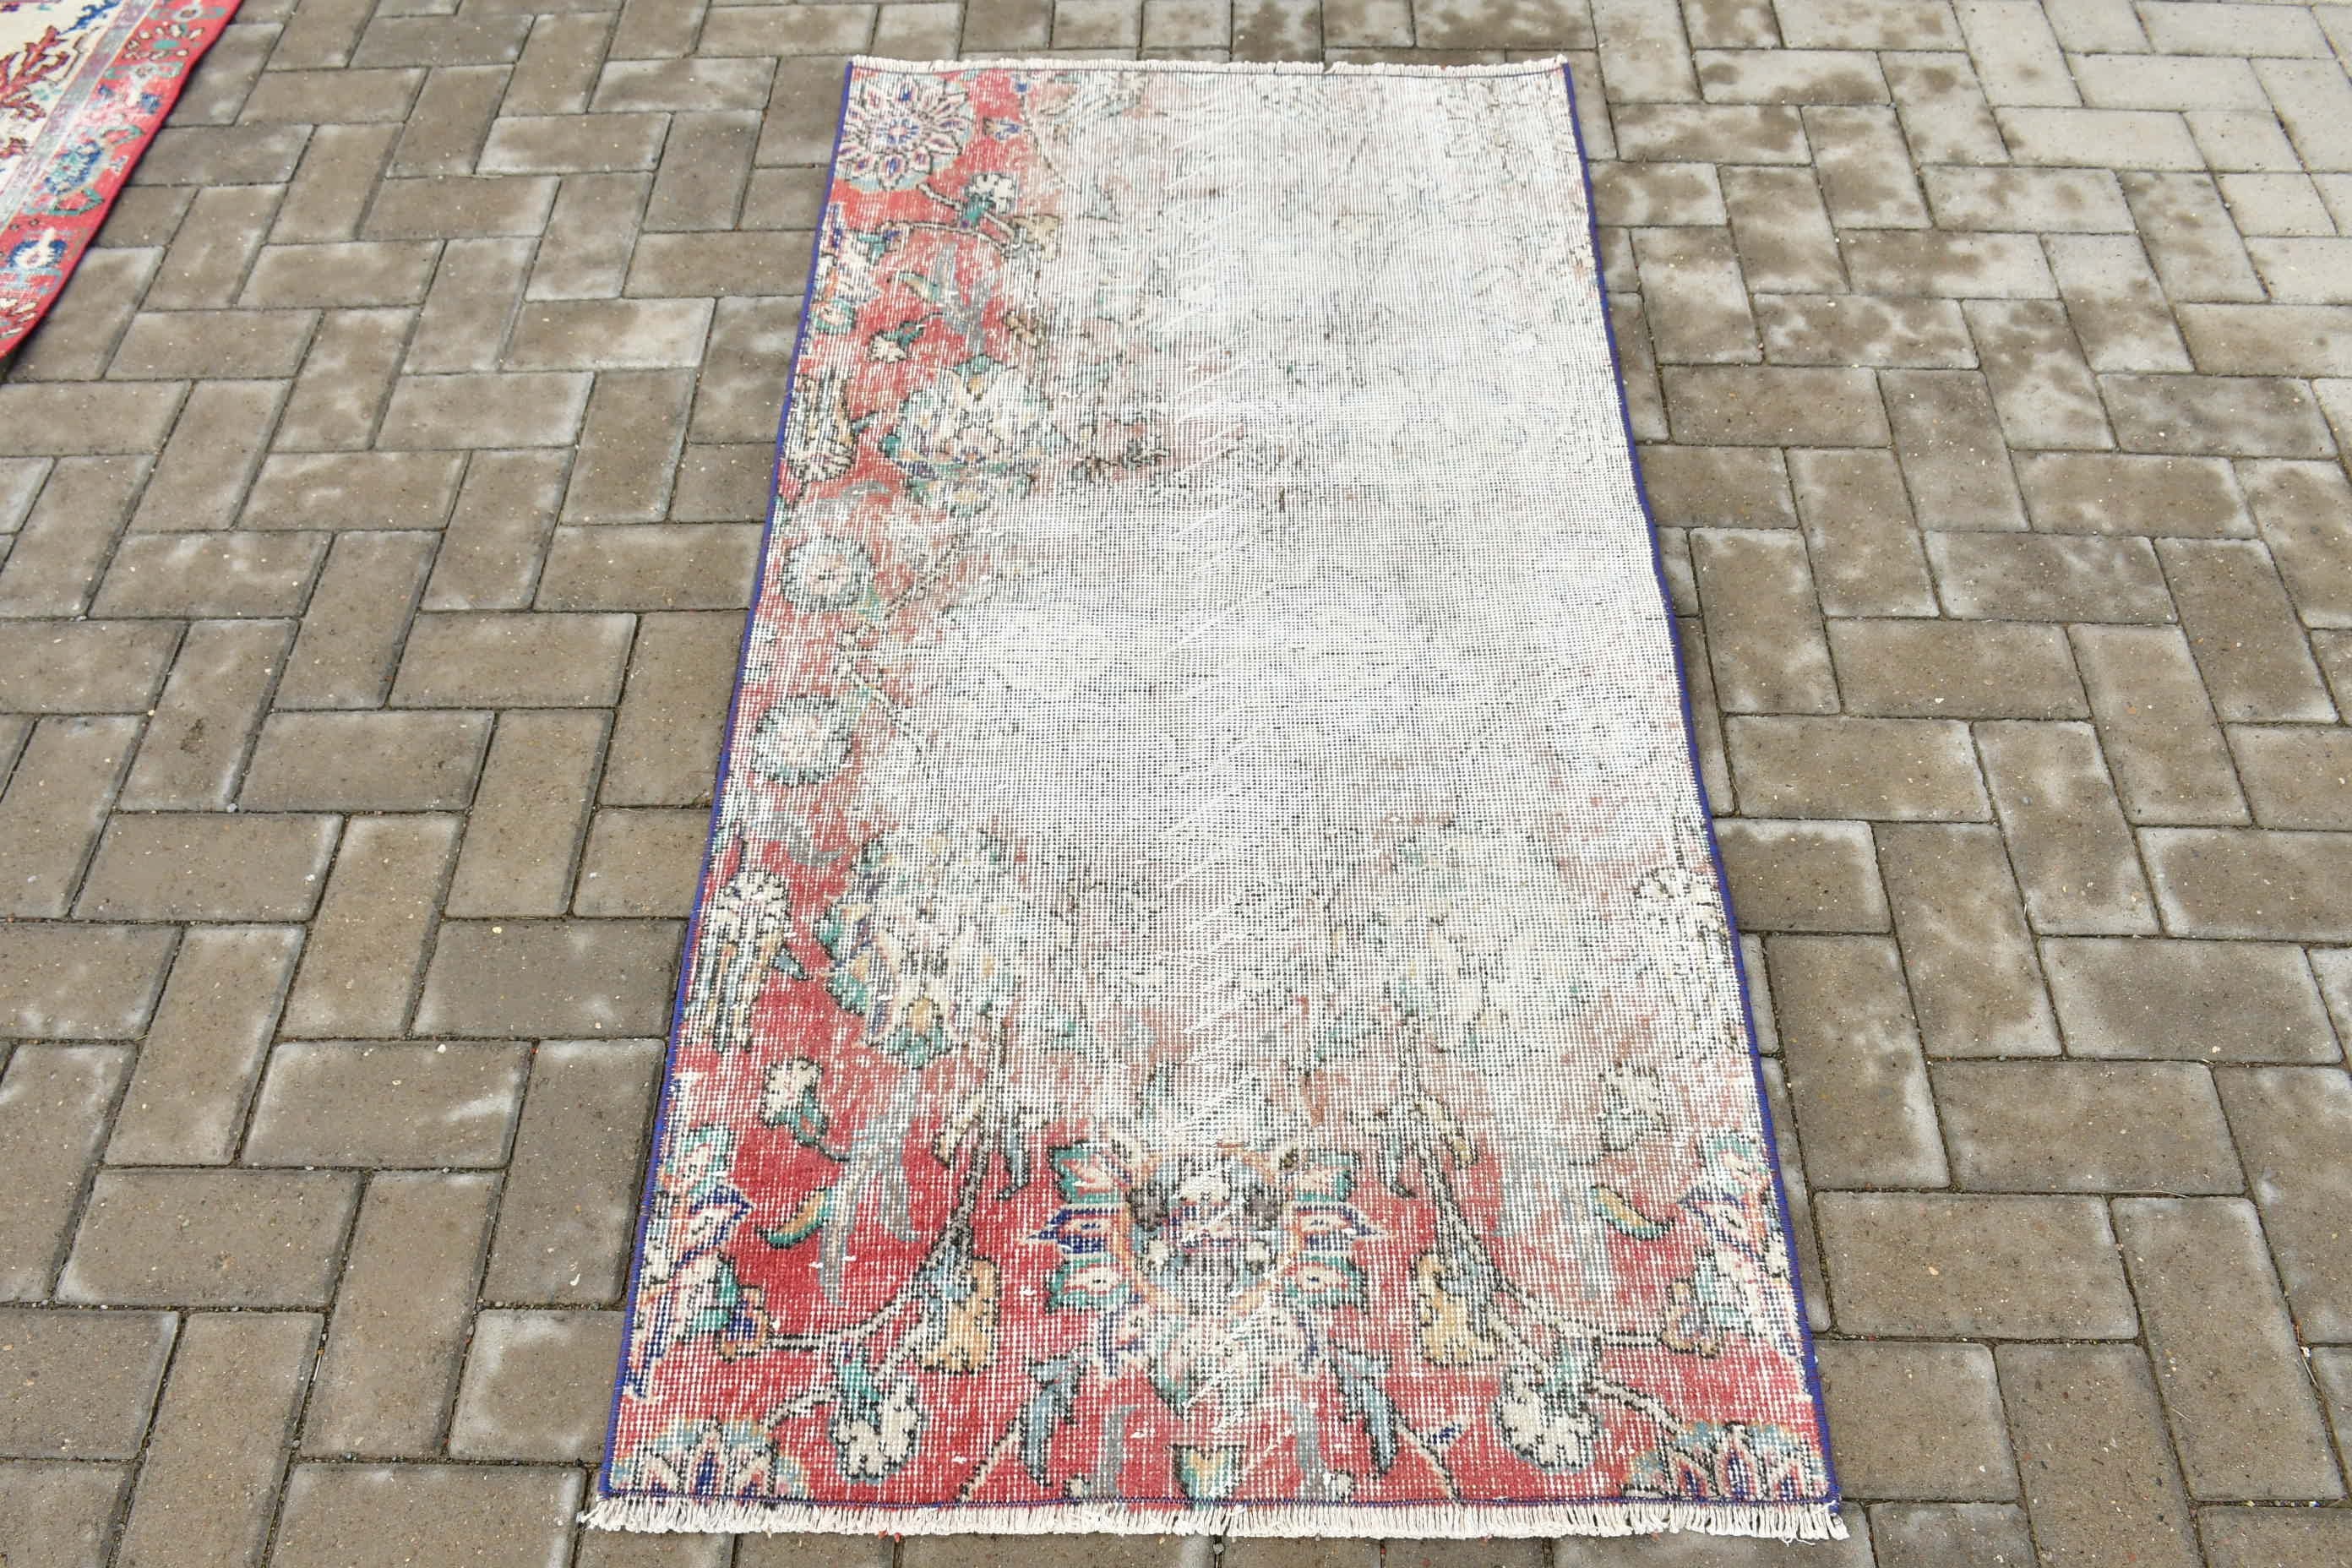 Entry Rug, Cool Rugs, Turkish Rug, Rugs for Entry, 2.6x4.9 ft Small Rug, Red Anatolian Rug, Home Decor Rug, Vintage Rug, Kitchen Rugs